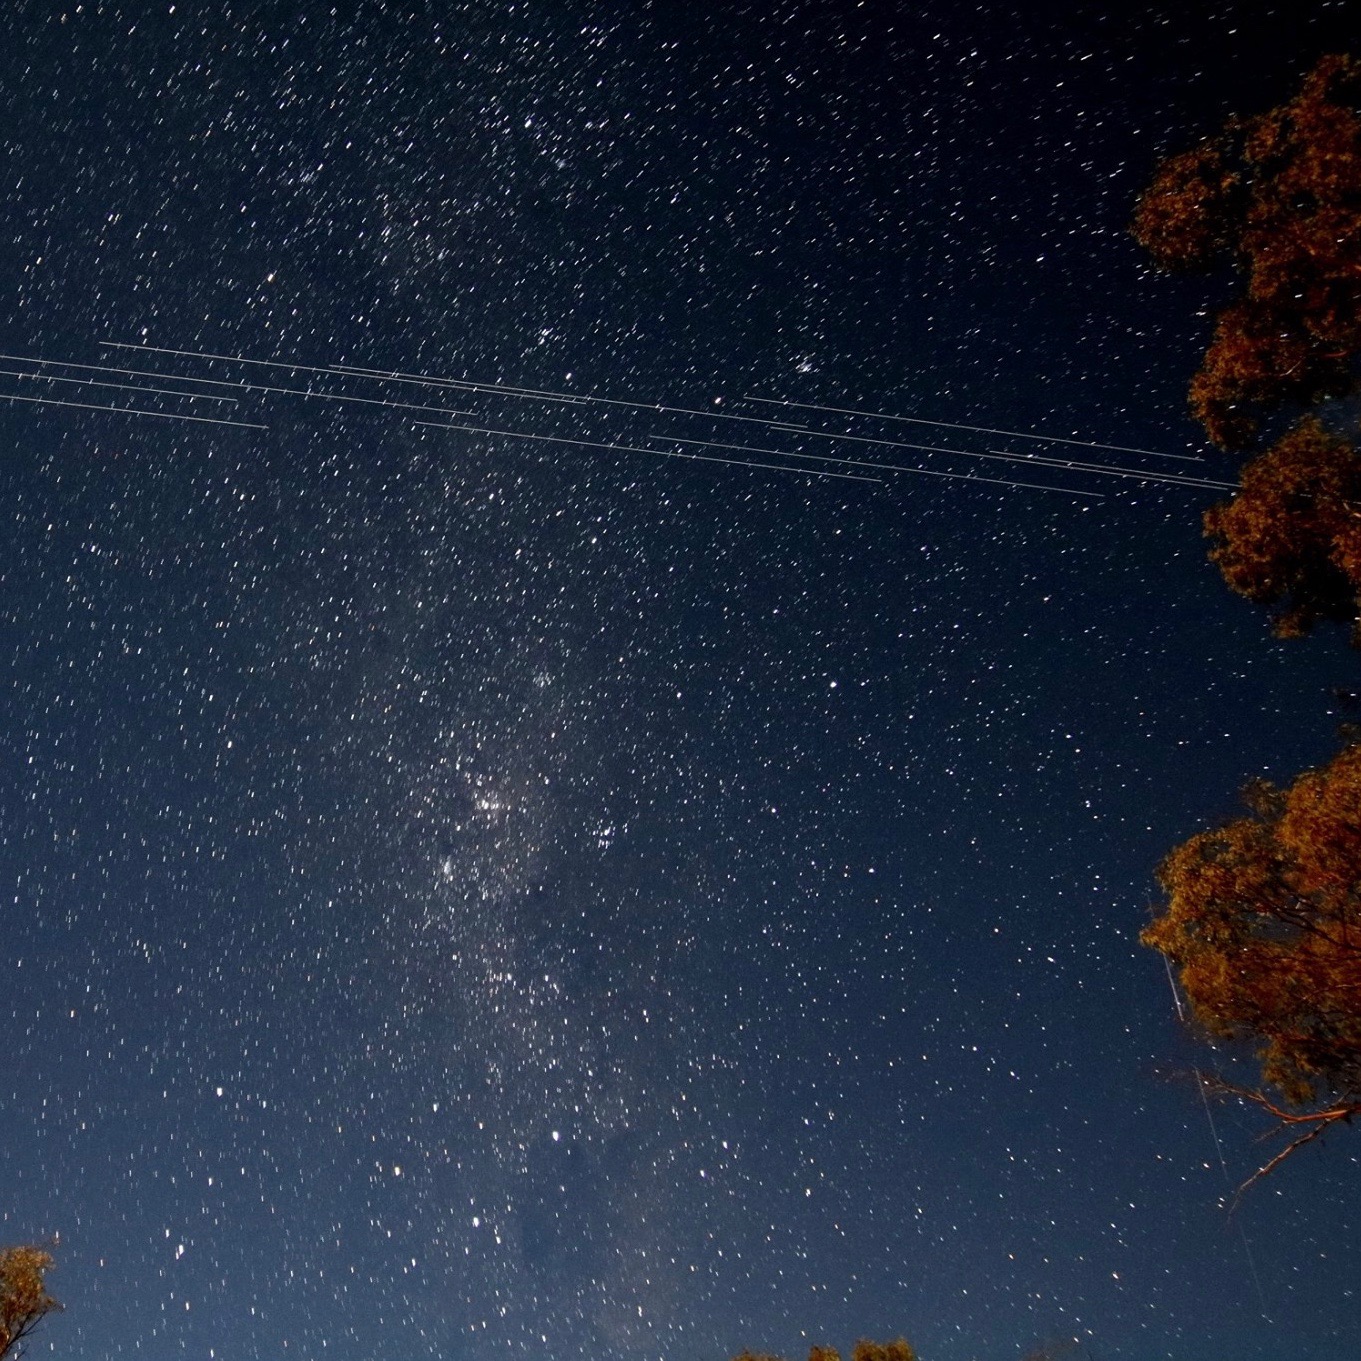 Goodbye, dark sky. The stars are rapidly disappearing from our night sky